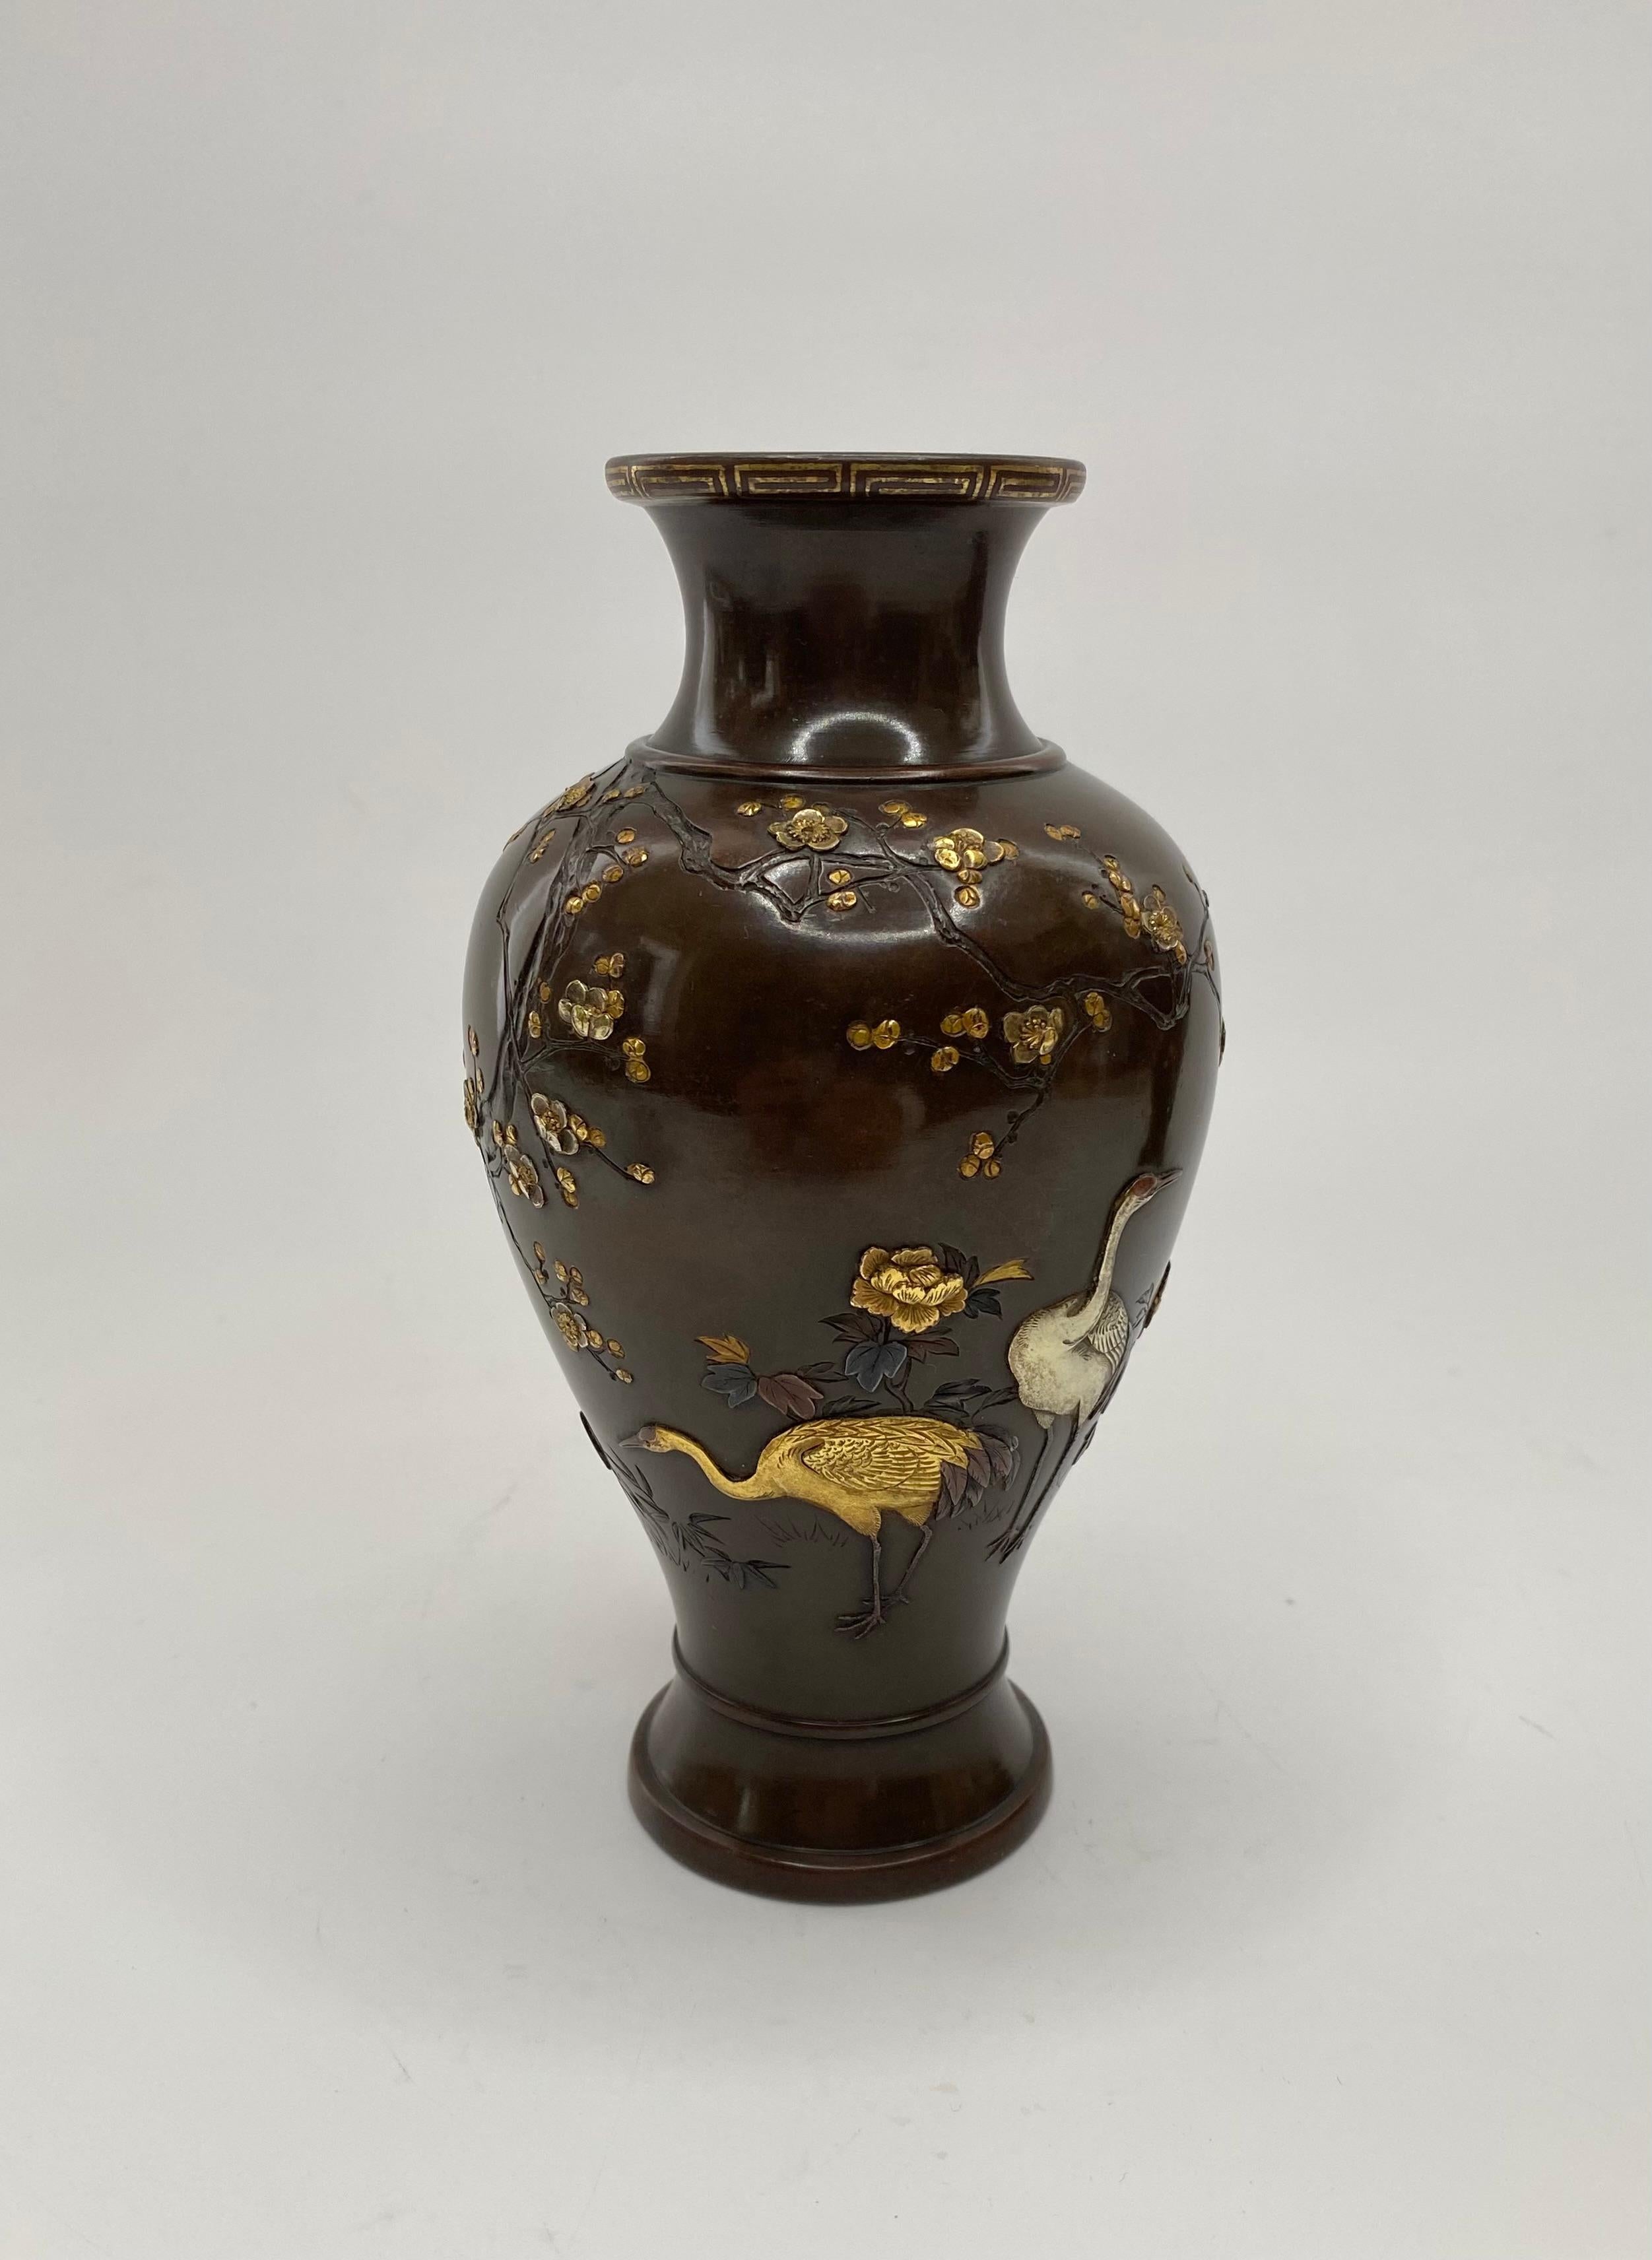 A fine pair of Japanese bronze and mixed metal vases, by Inoue of Kyoto, Meiji Period. The baluster shaped vases, decorated in gold, silver and shakudo inlay, with cranes beneath flowering cherry blossom trees, with insects flying above. The details